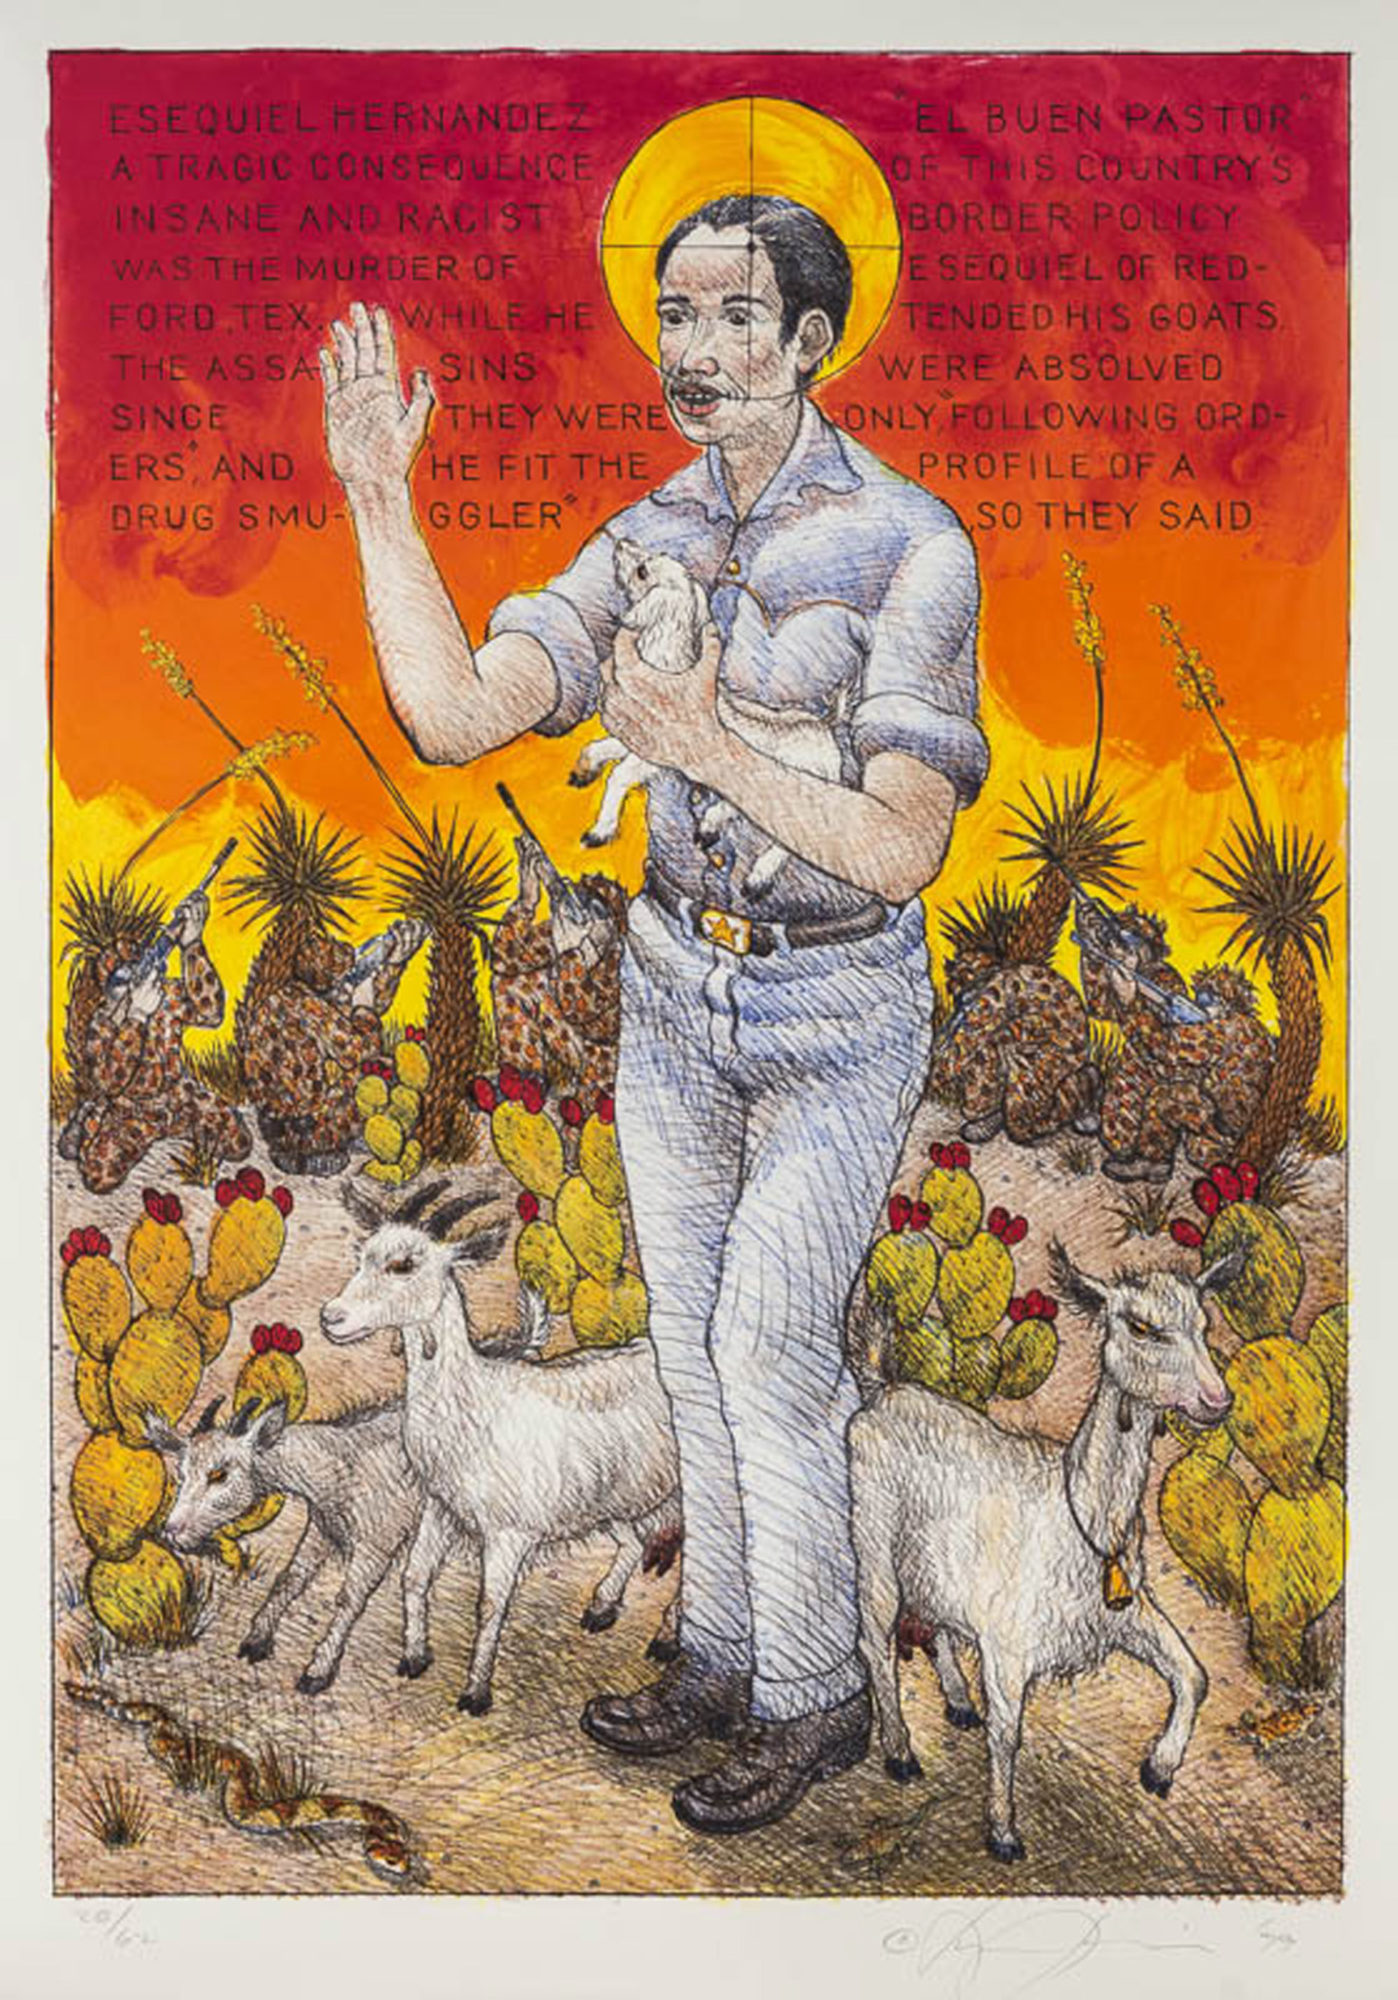 illustration of Esequiel Hernandez in the style of a religious icon. He holds a baby goat while other goats and cactus surround his feet and camouflaged border patrol agents aim their guns in the background